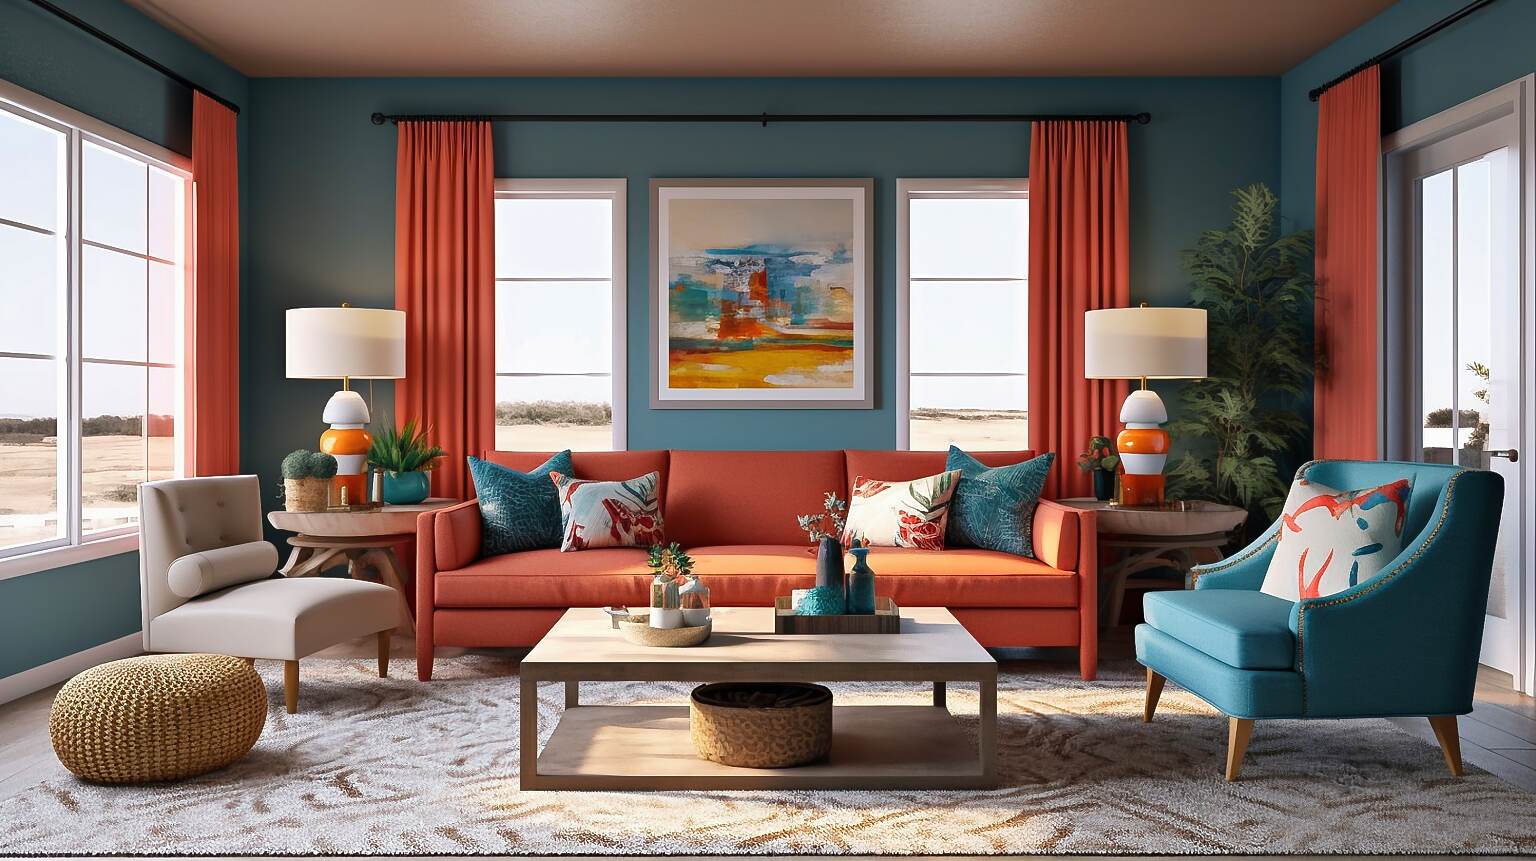 Image Of A Living Room That Showcases The Trend